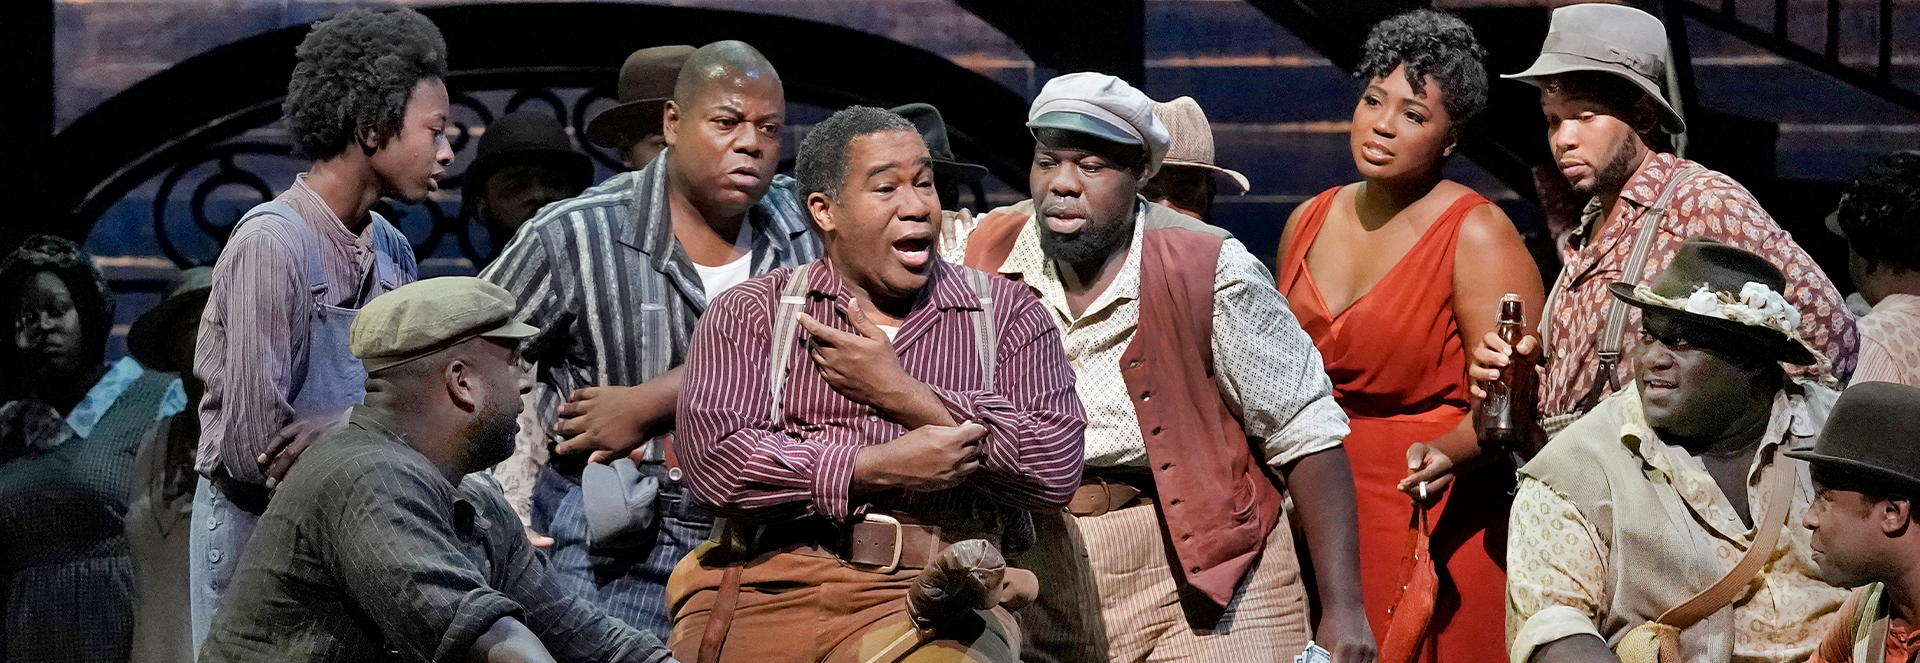 Great Performances Porgy & Bess Cast on Stage at the Met